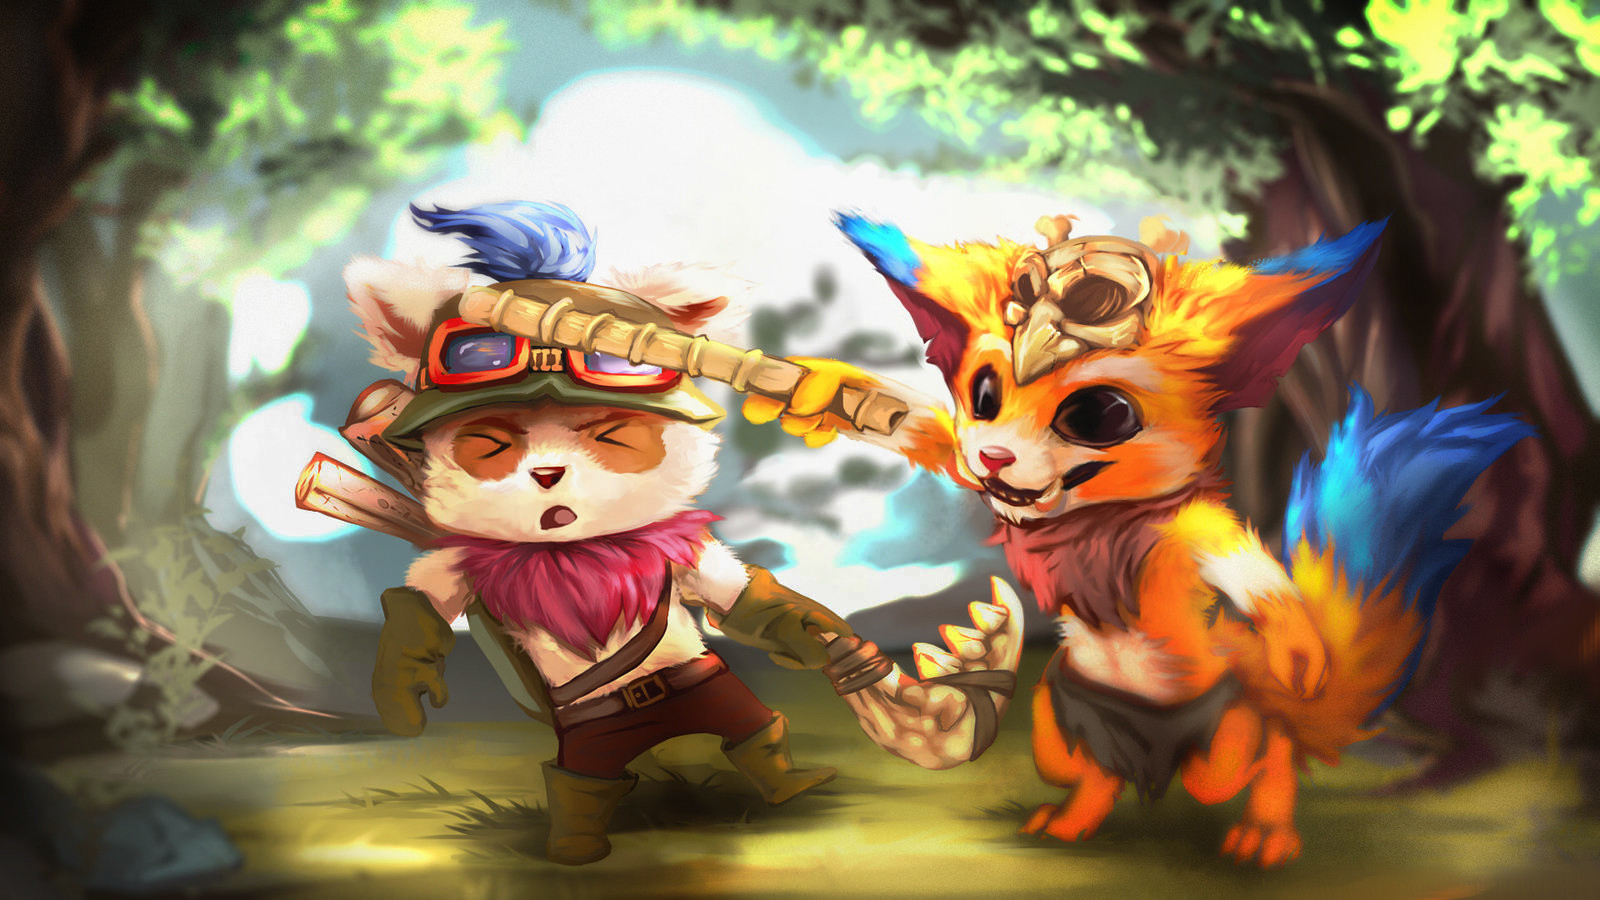 Gnar and Teemo swap weapons. 